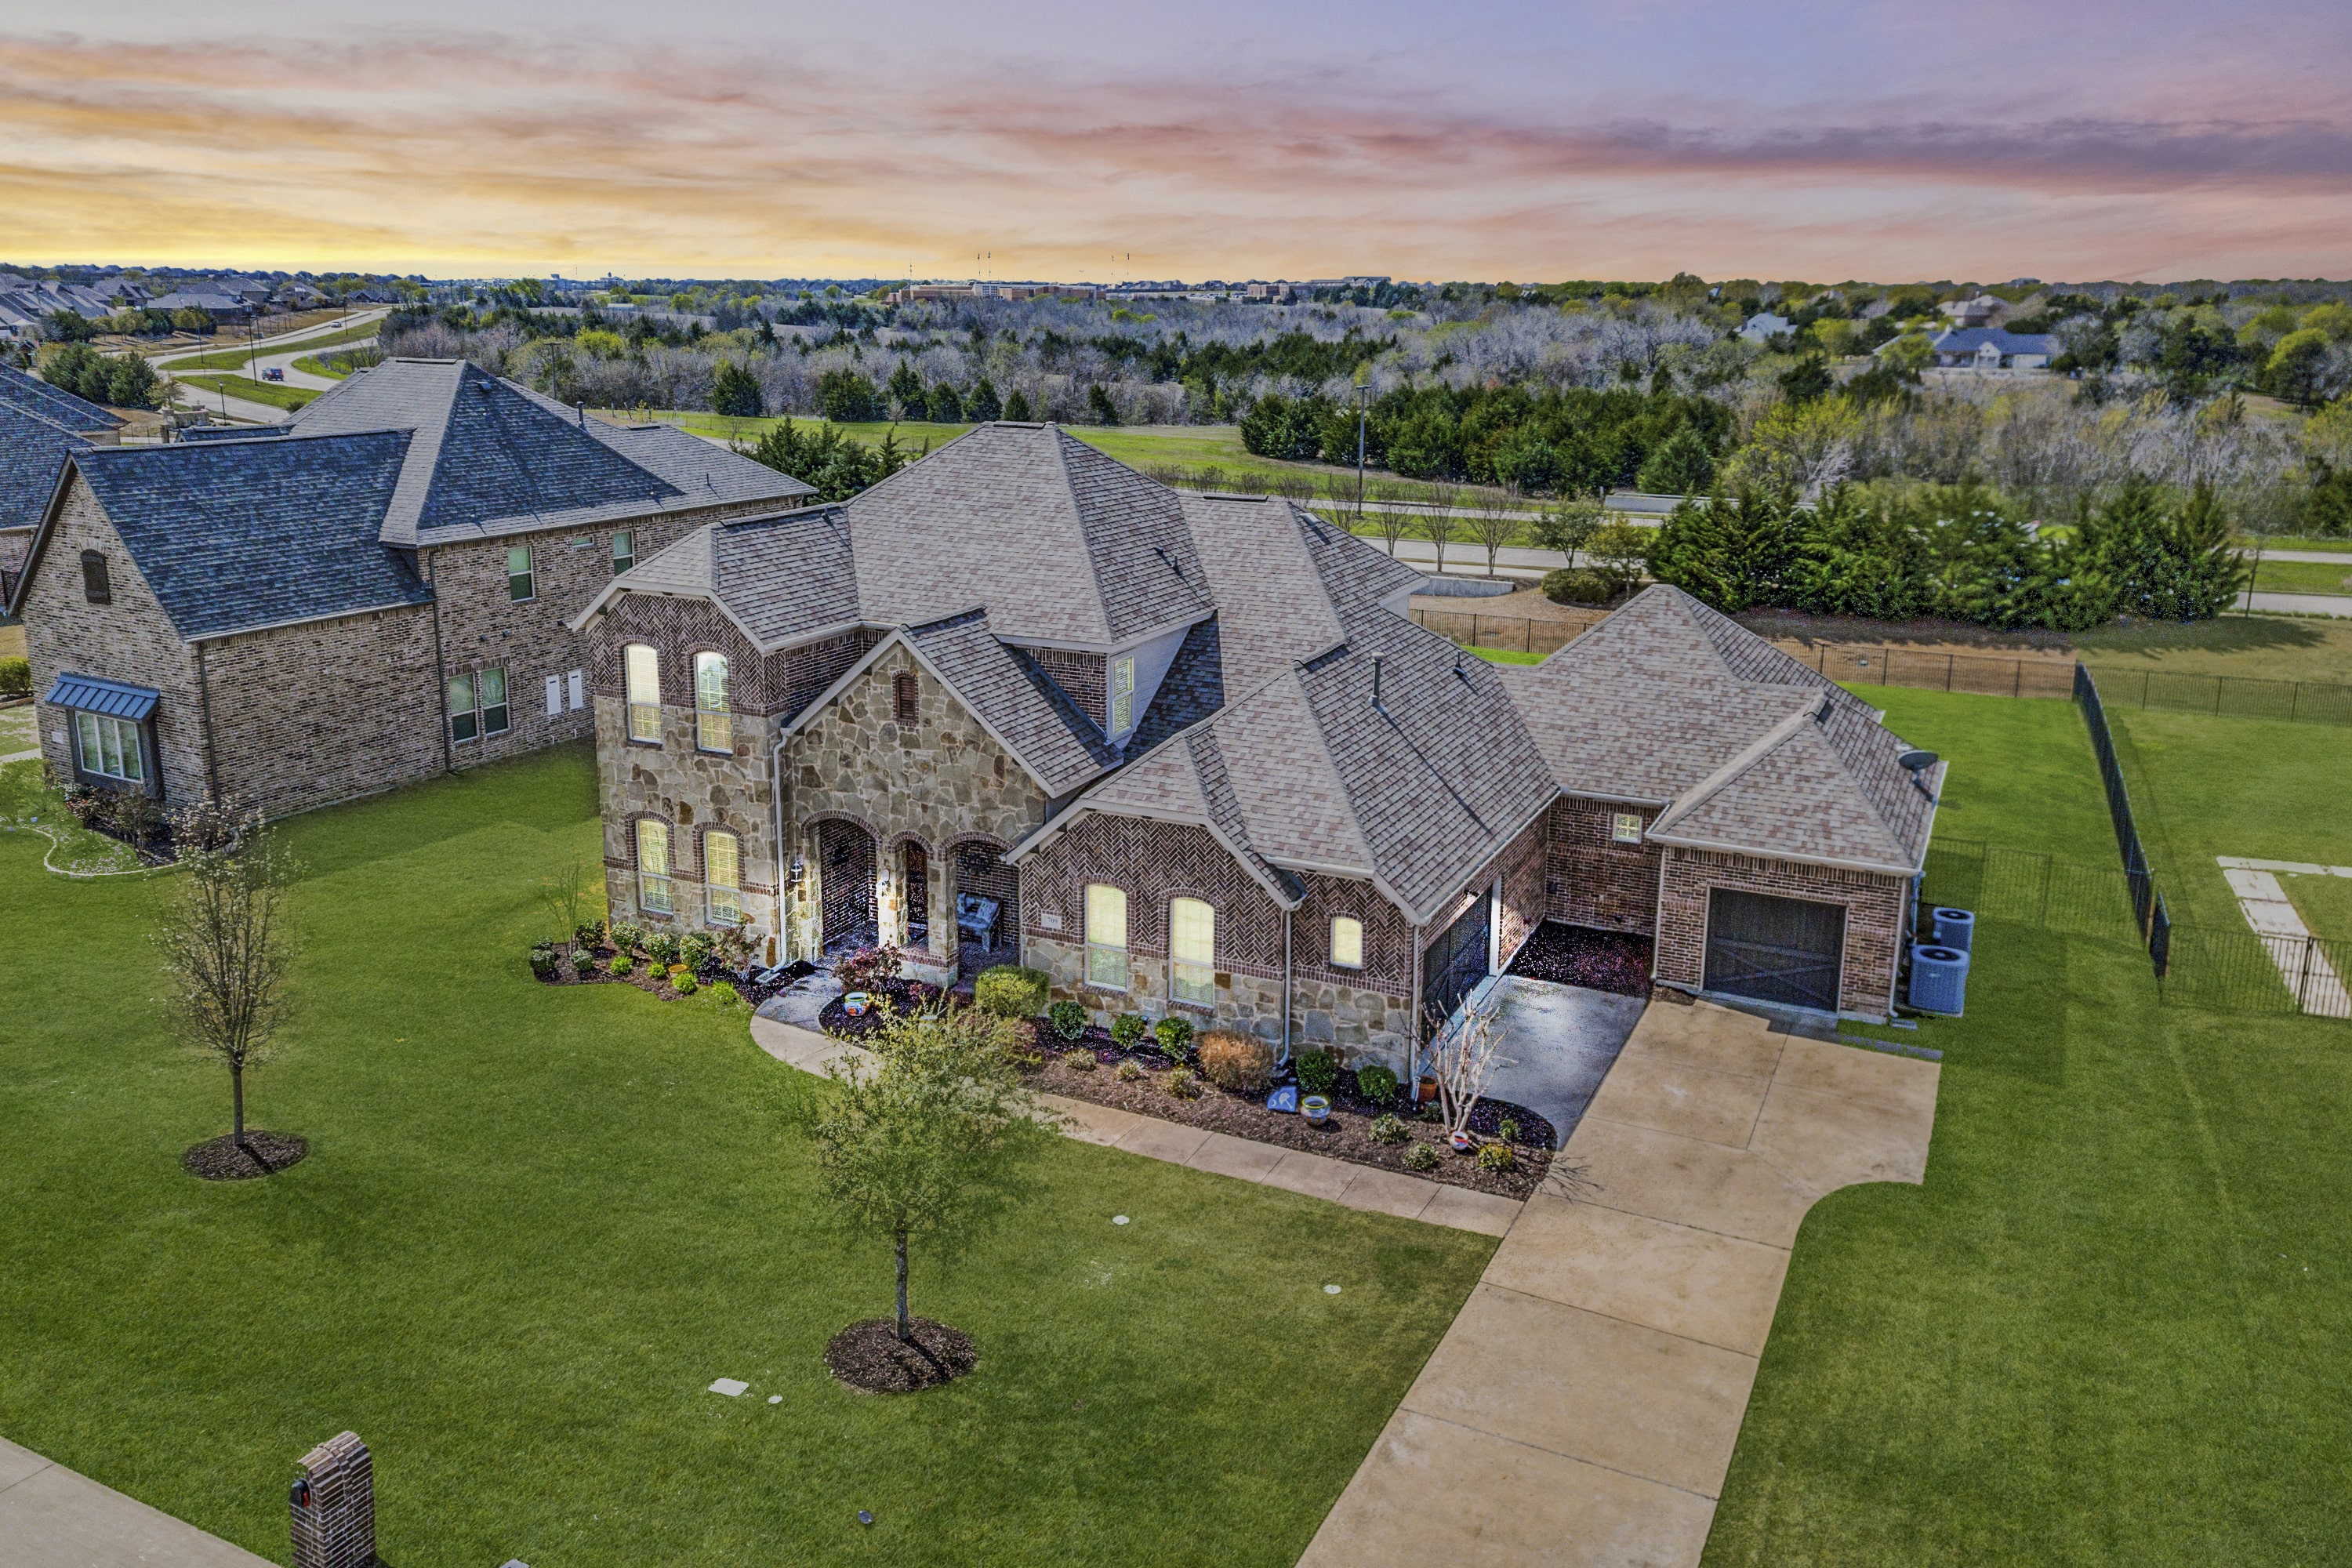 Rockwall Real Estate - Homes for Sale in Rockwall